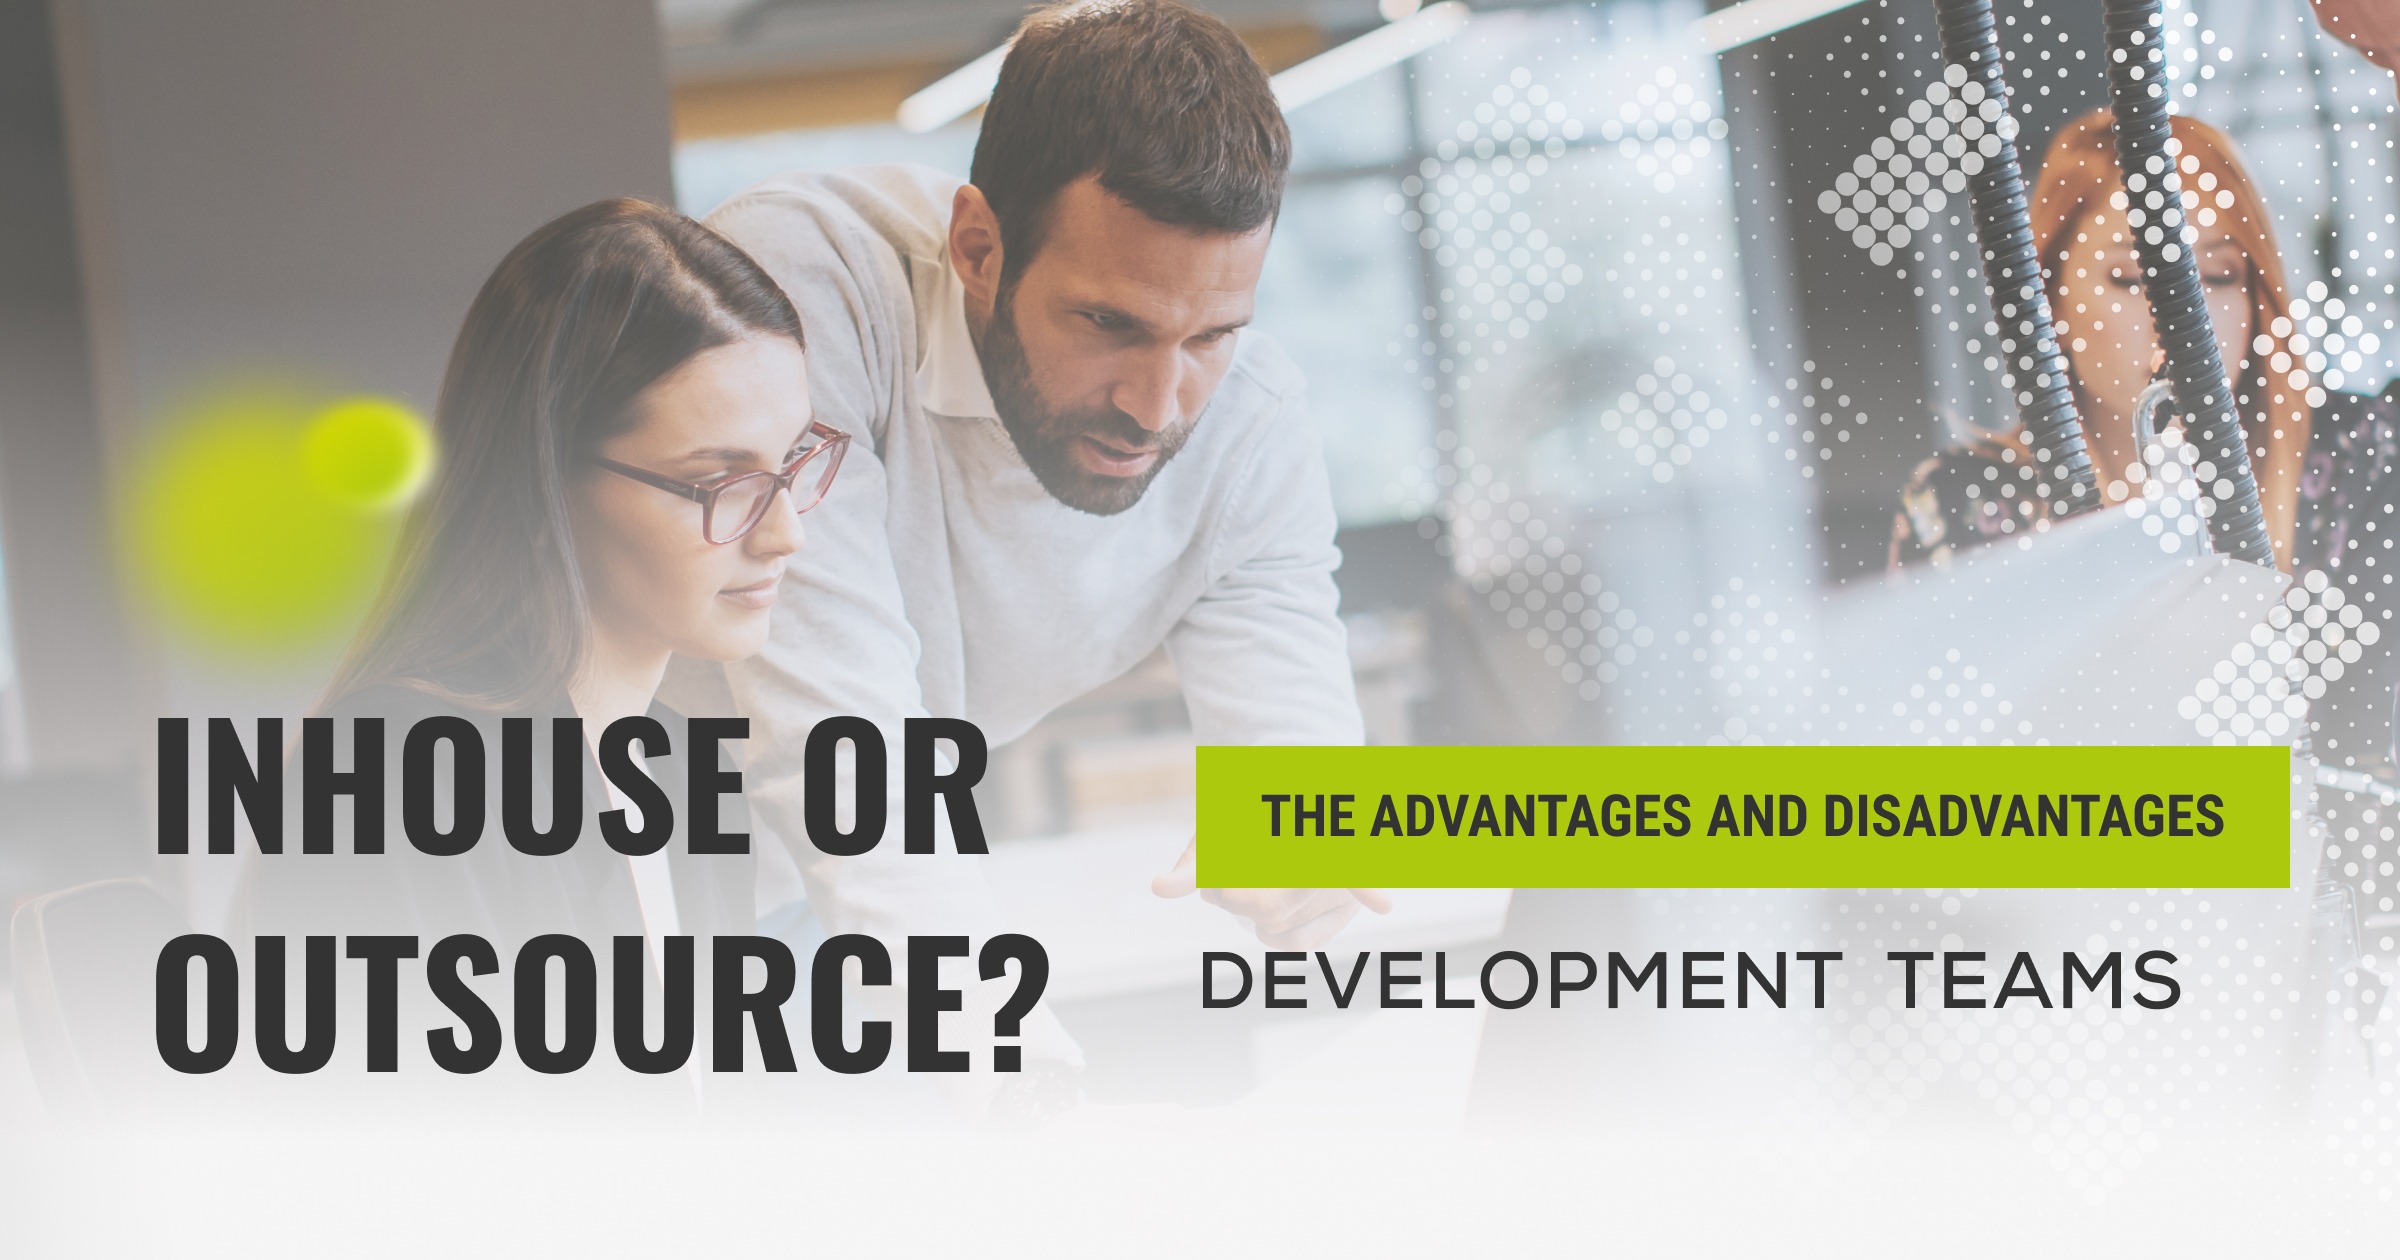 Inhouse or Outsource? The Pros and Cons of Development Teams